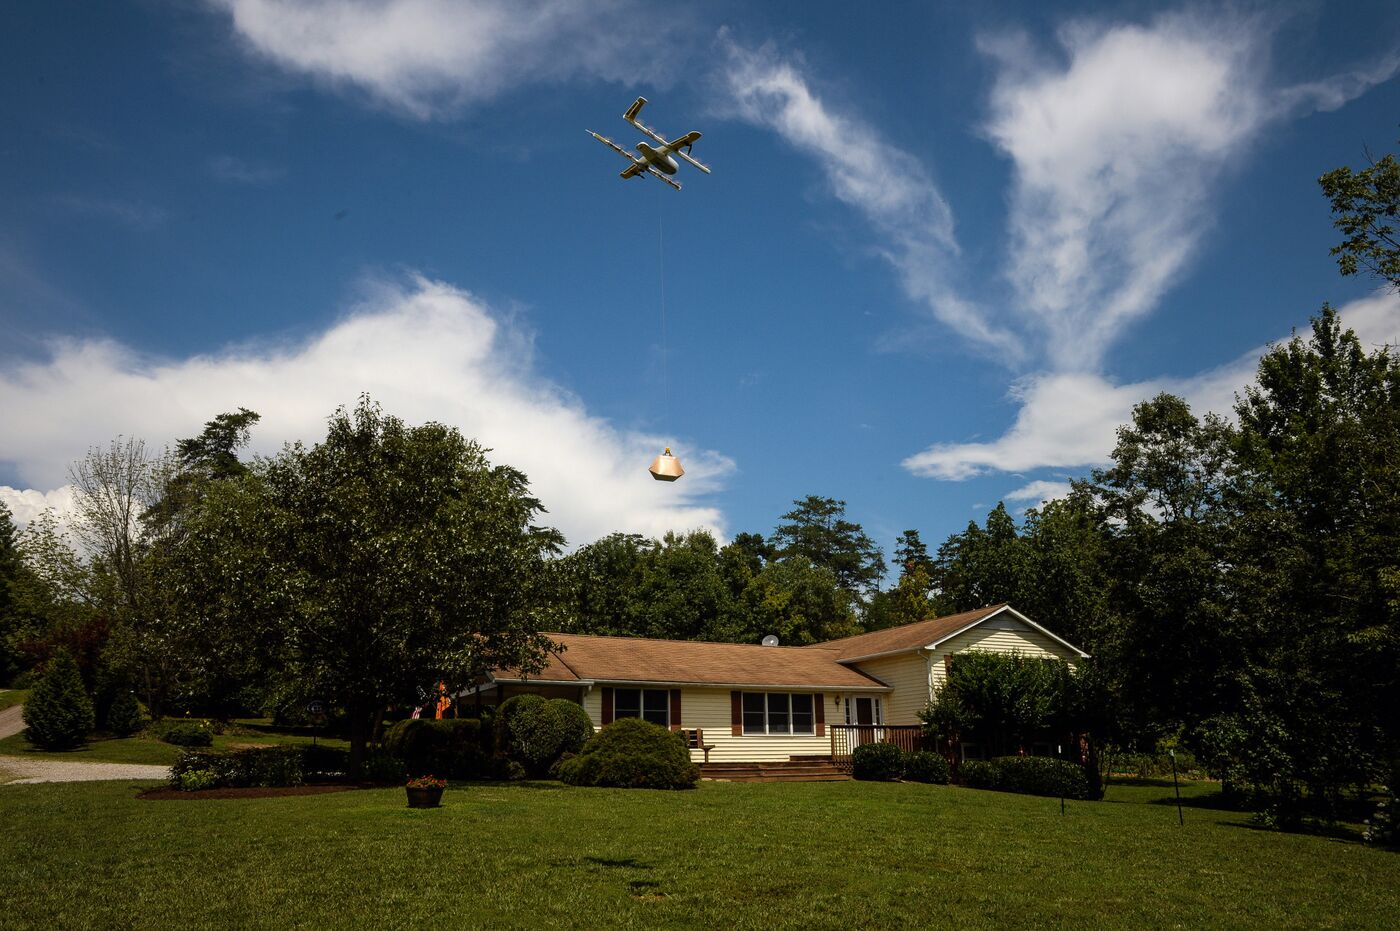 1400x 1 - Google Spinoff’s Drone Delivery Business First to Get FAA Approval